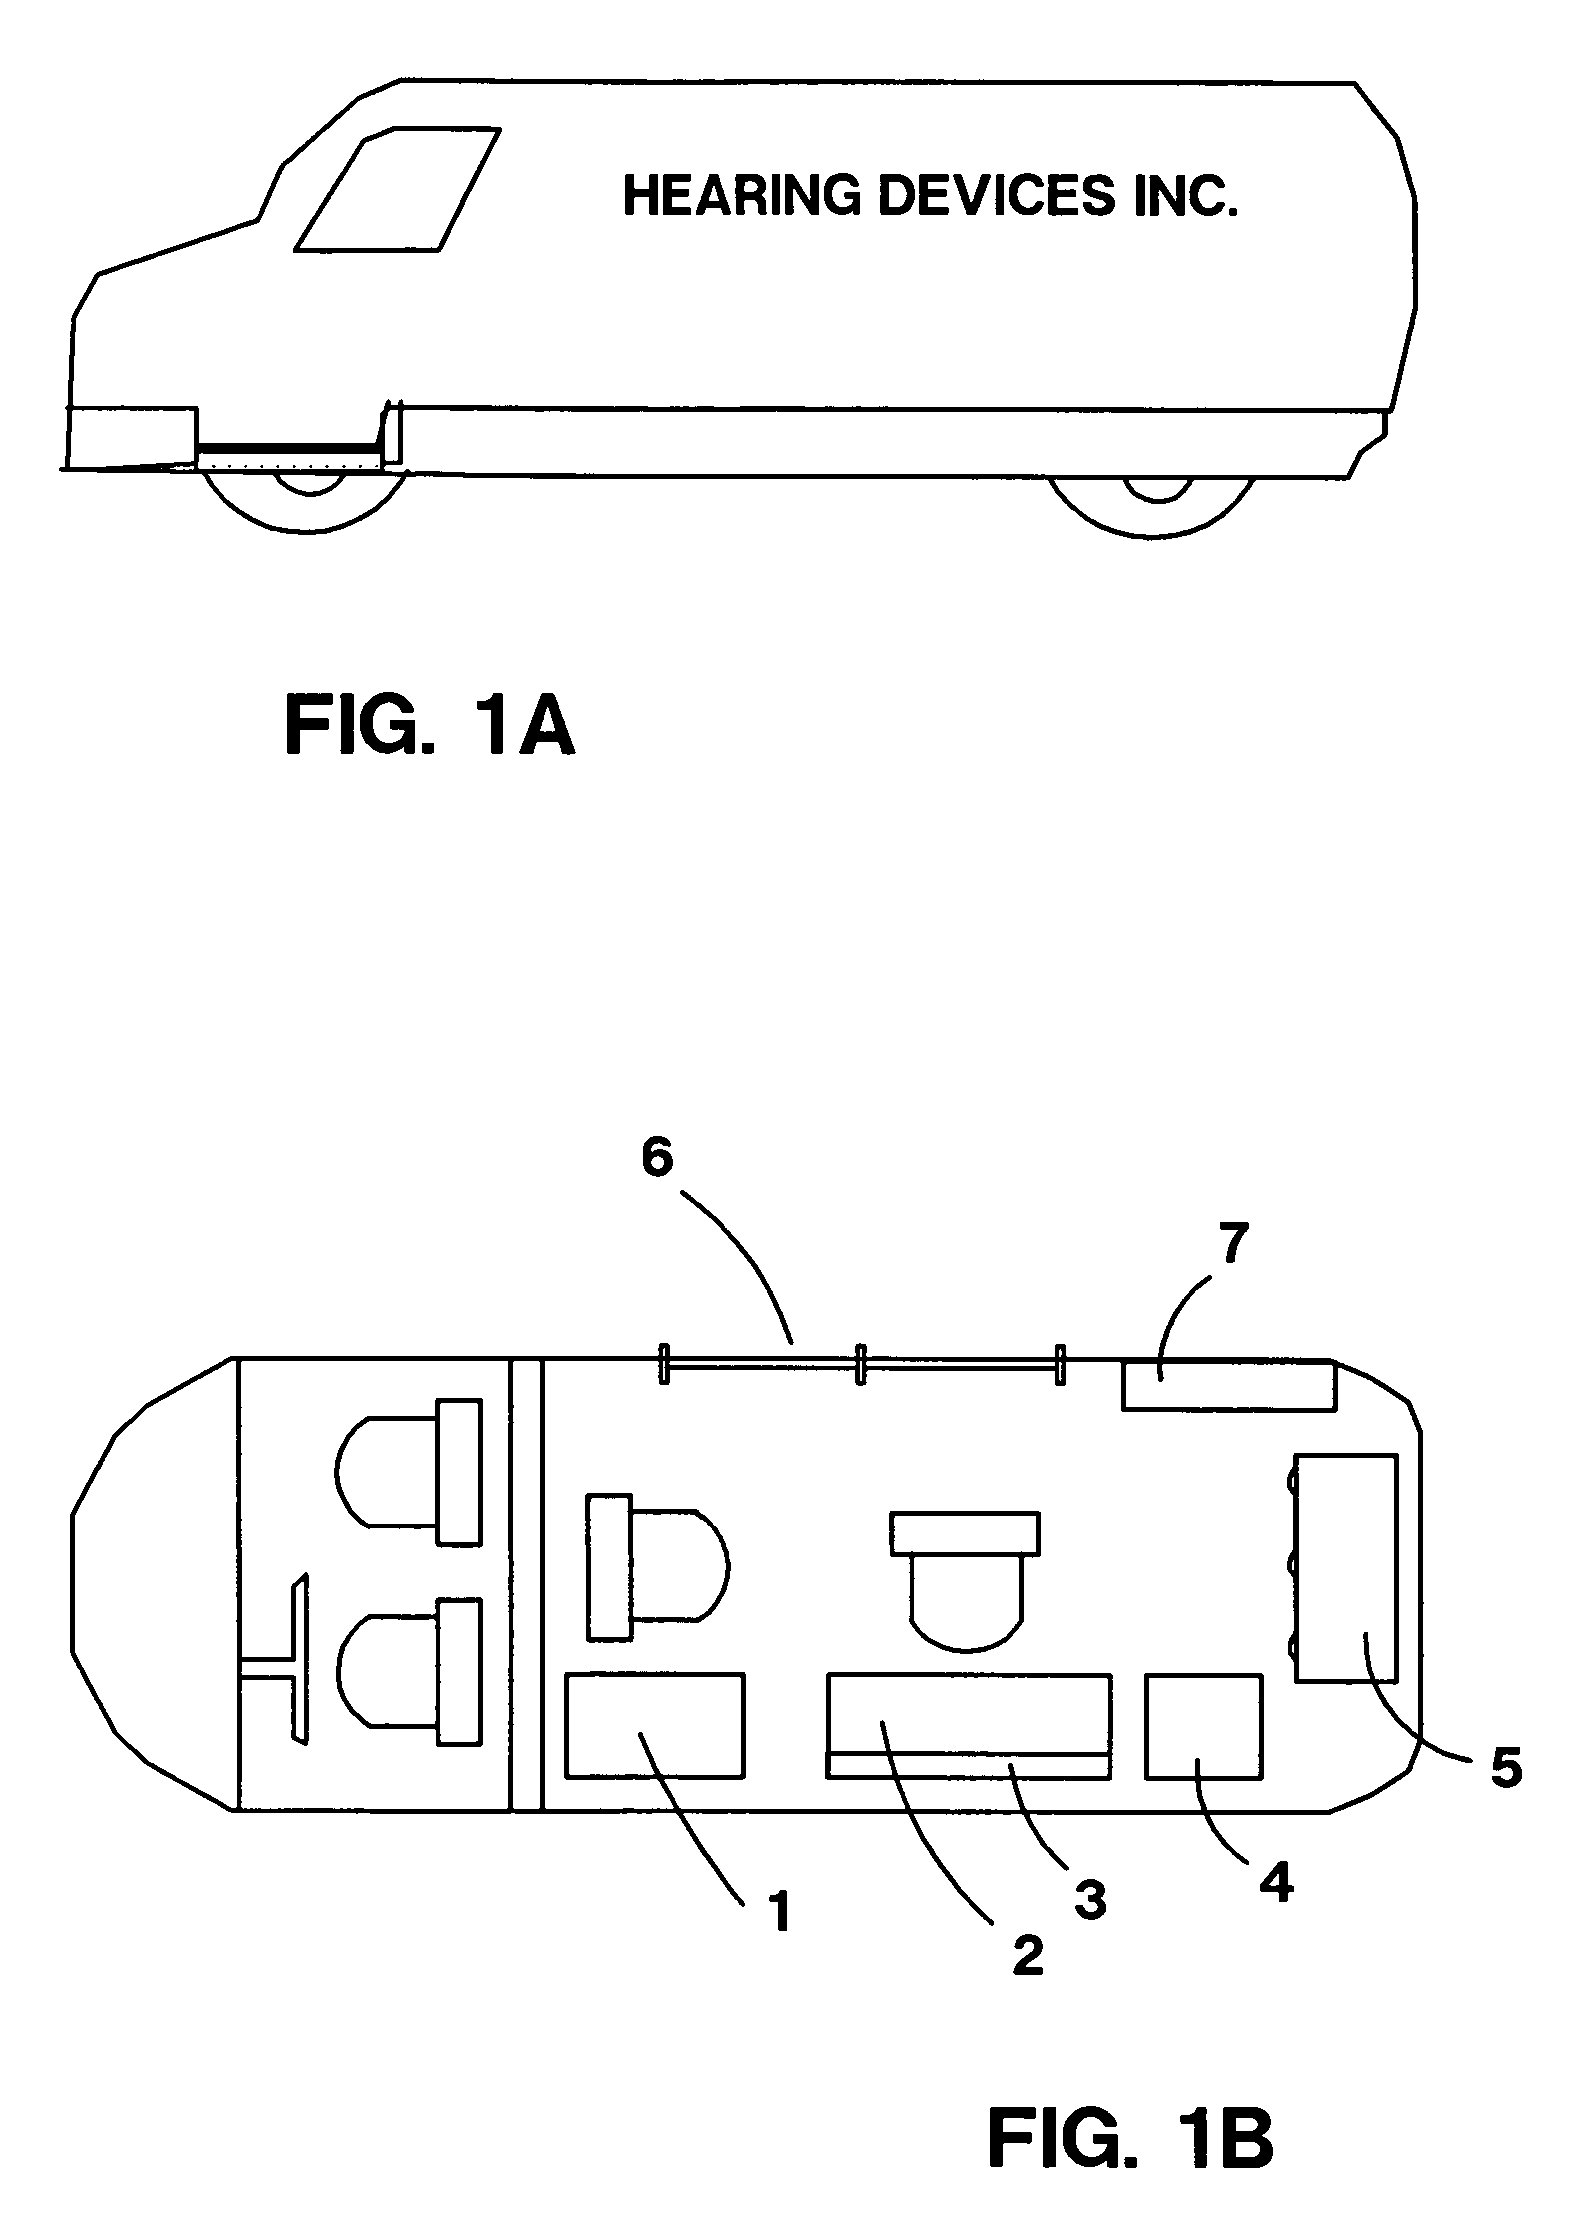 System and method for rapidly supplying custom hearing devices